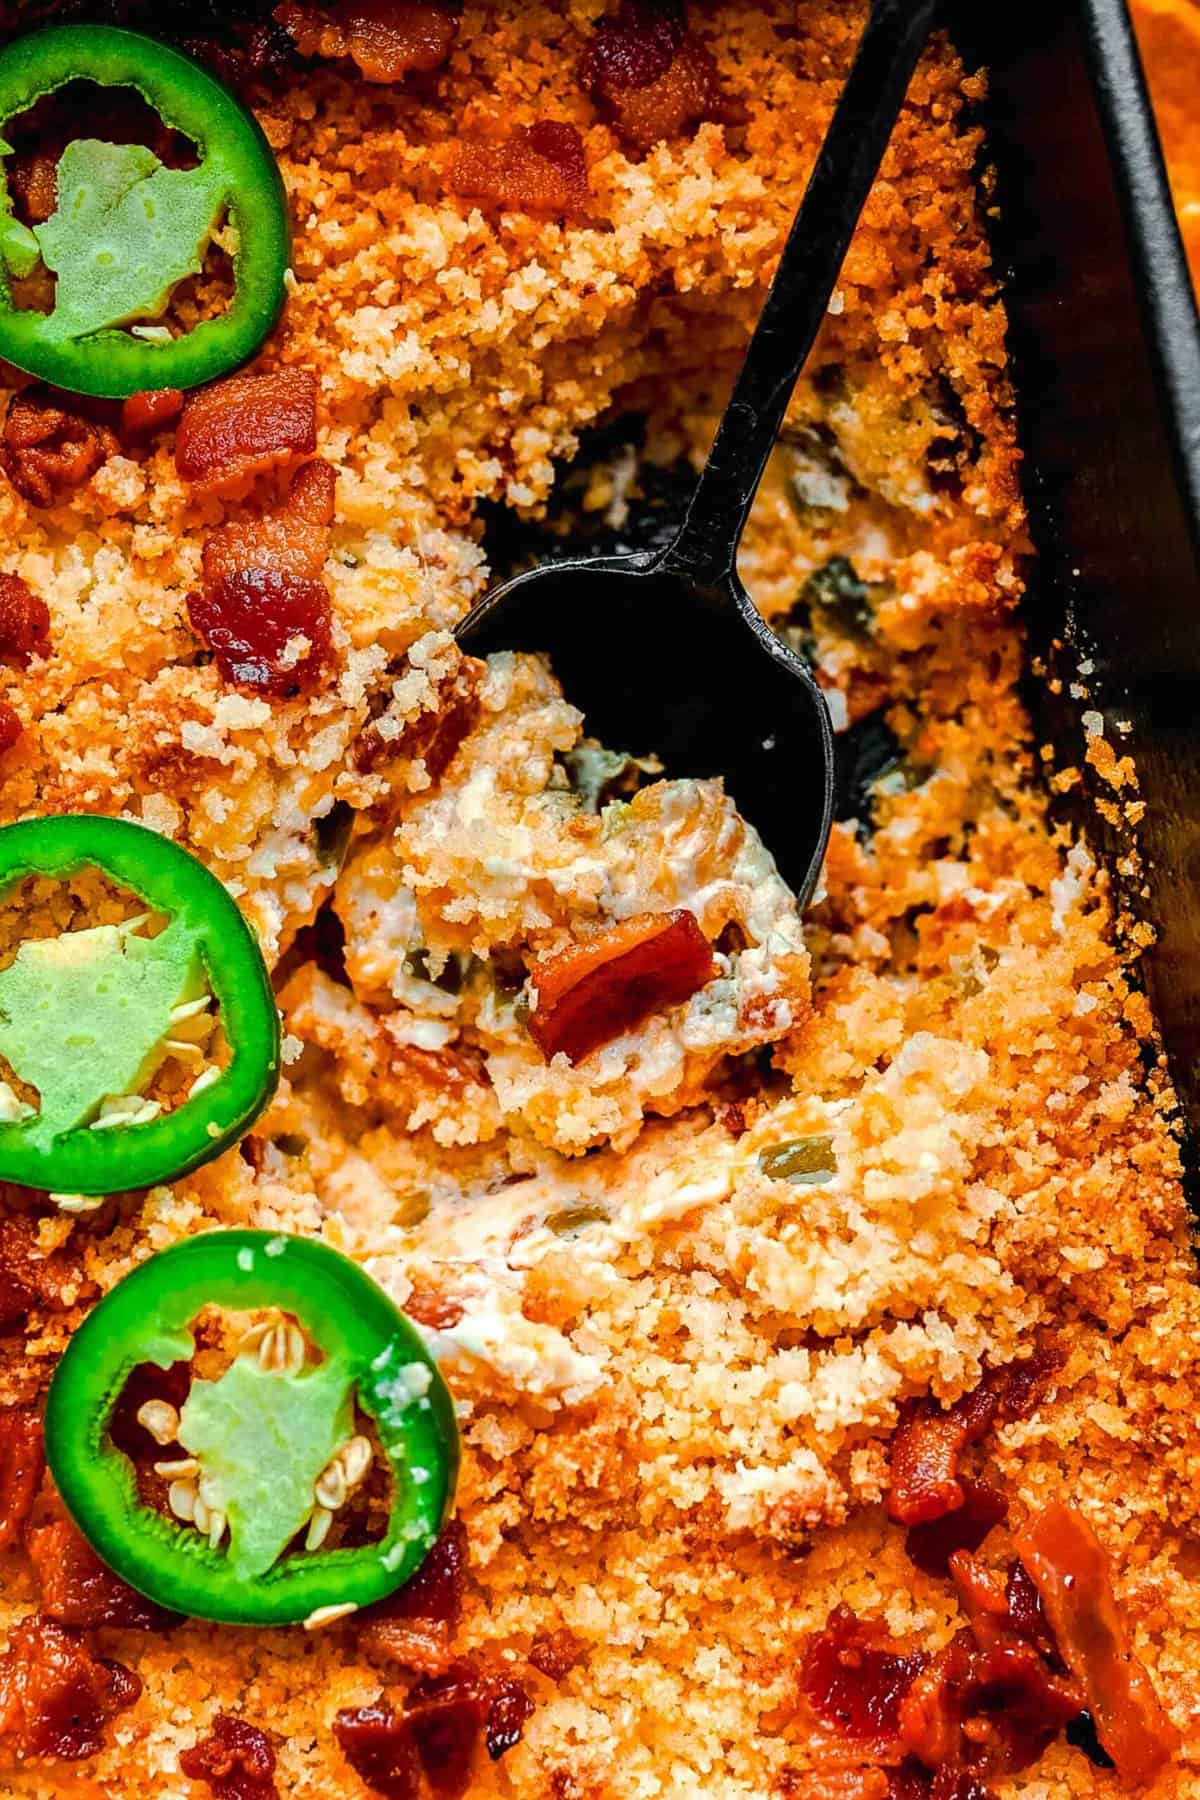 Taking a scoop out of jalapeno popper dip.